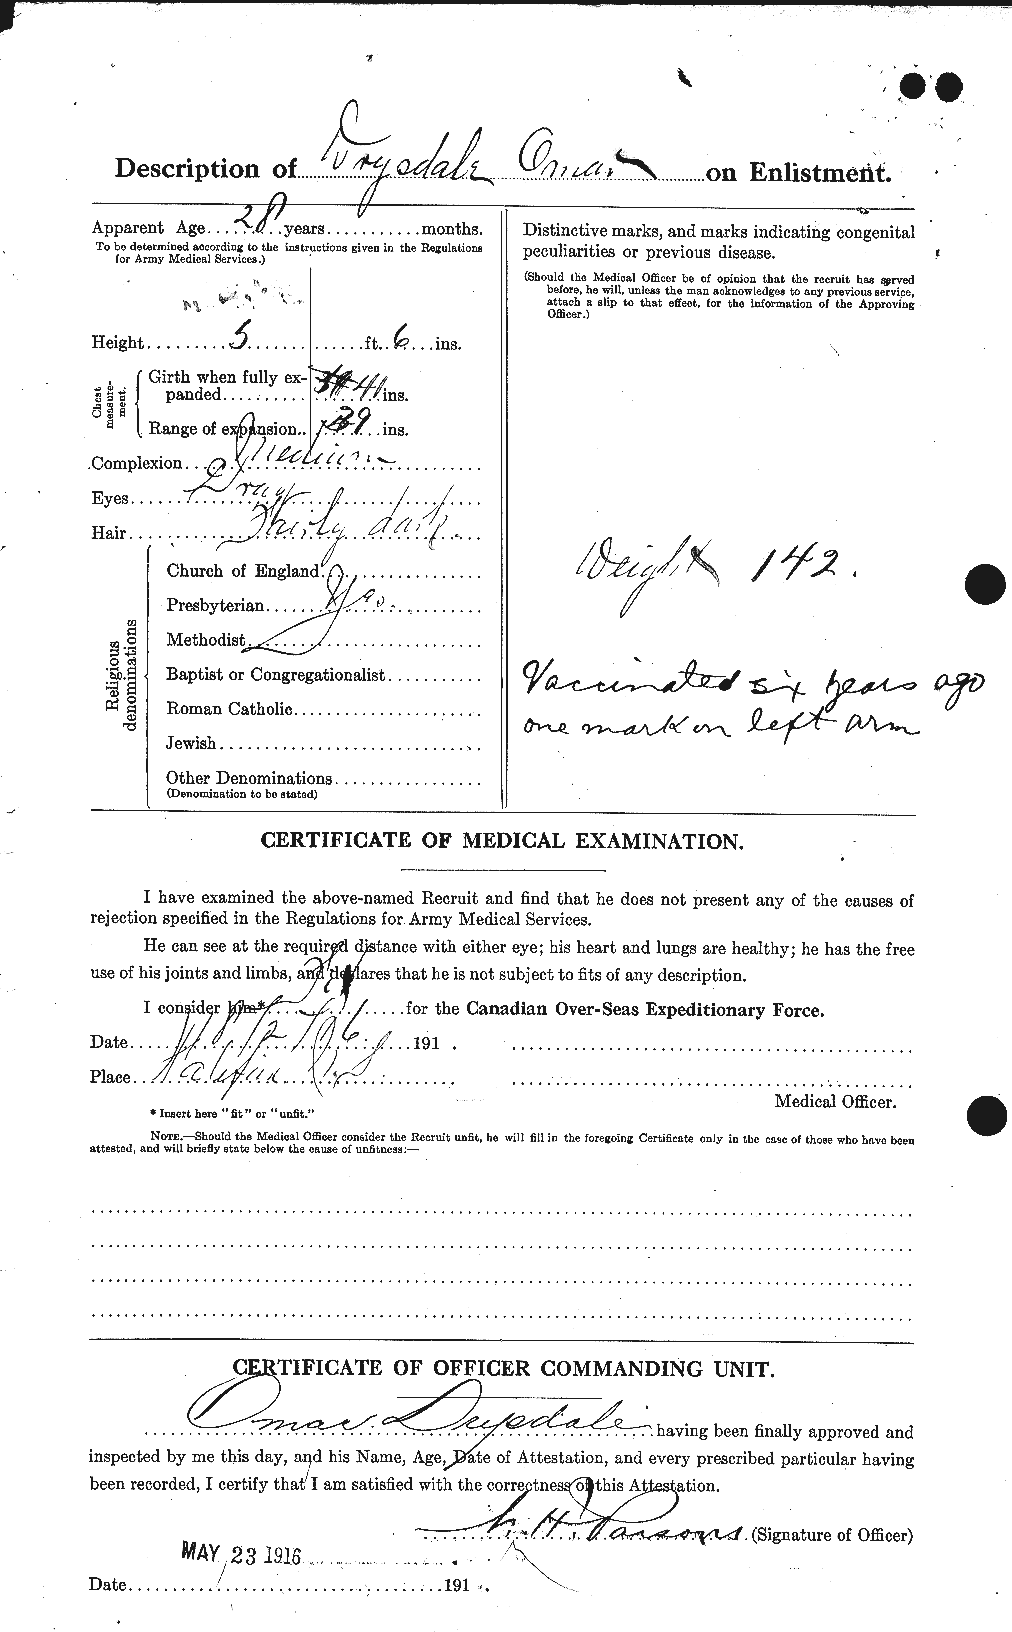 Personnel Records of the First World War - CEF 303193b